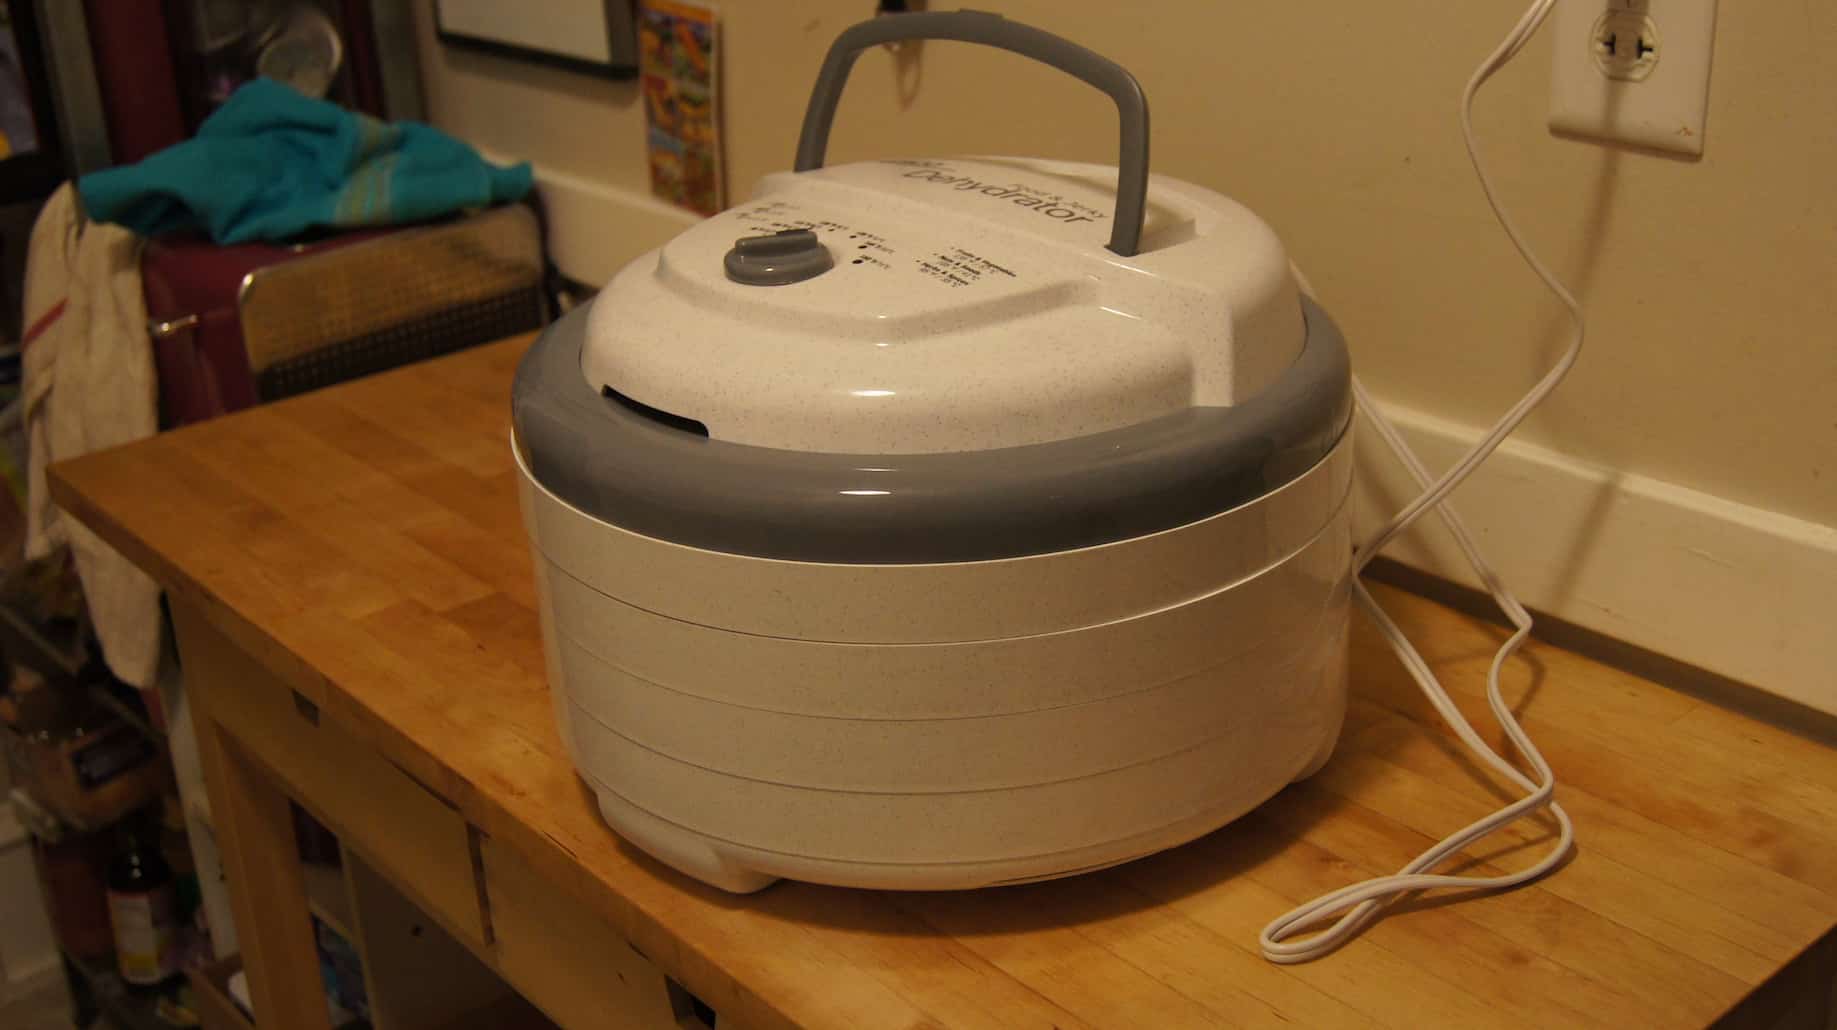 A white food dehydrator on top of wood table is plugged in to the wall outlet behind